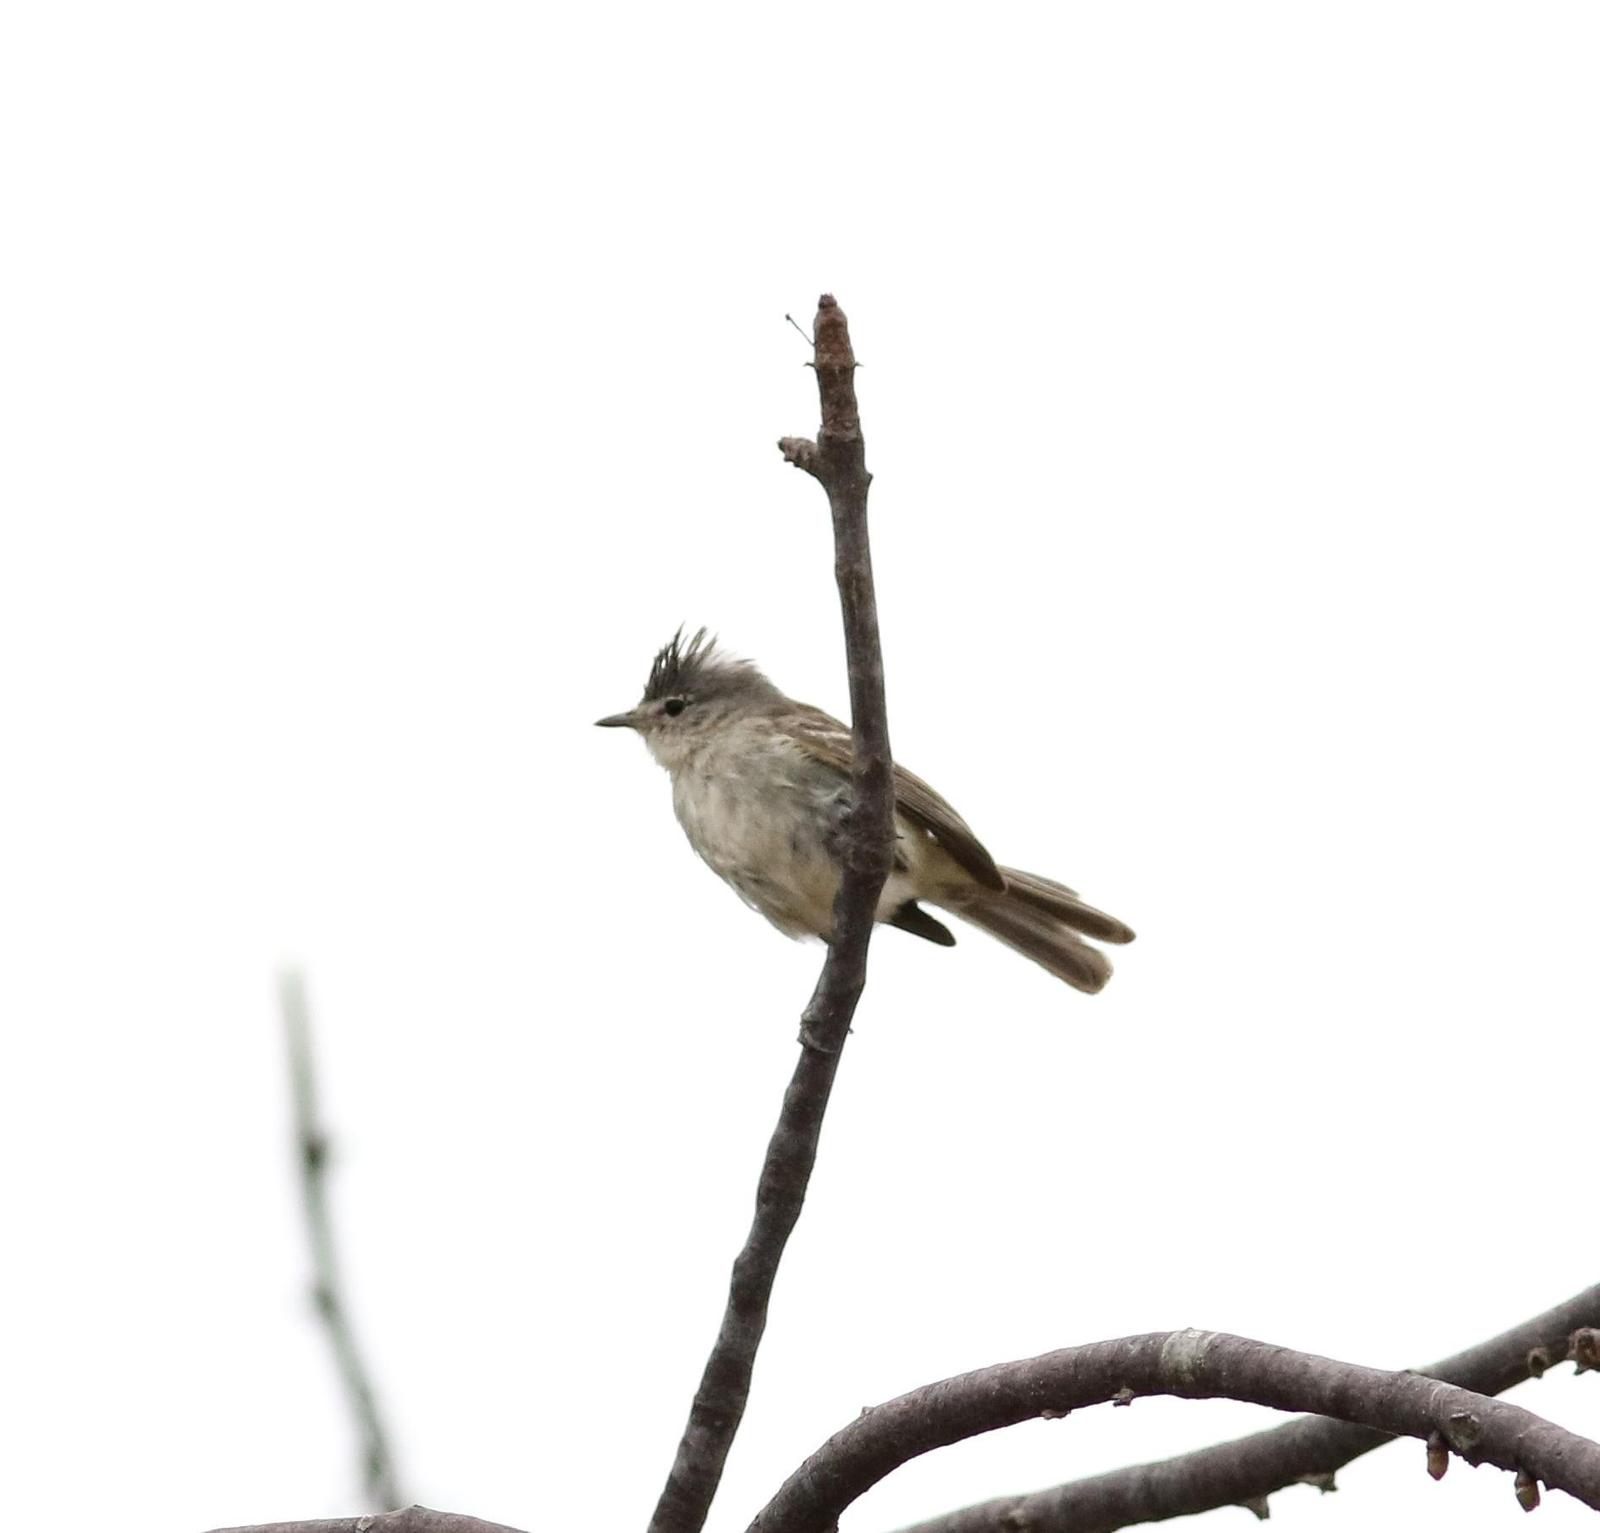 Gray-and-white Tyrannulet Photo by Leonardo Garrigues